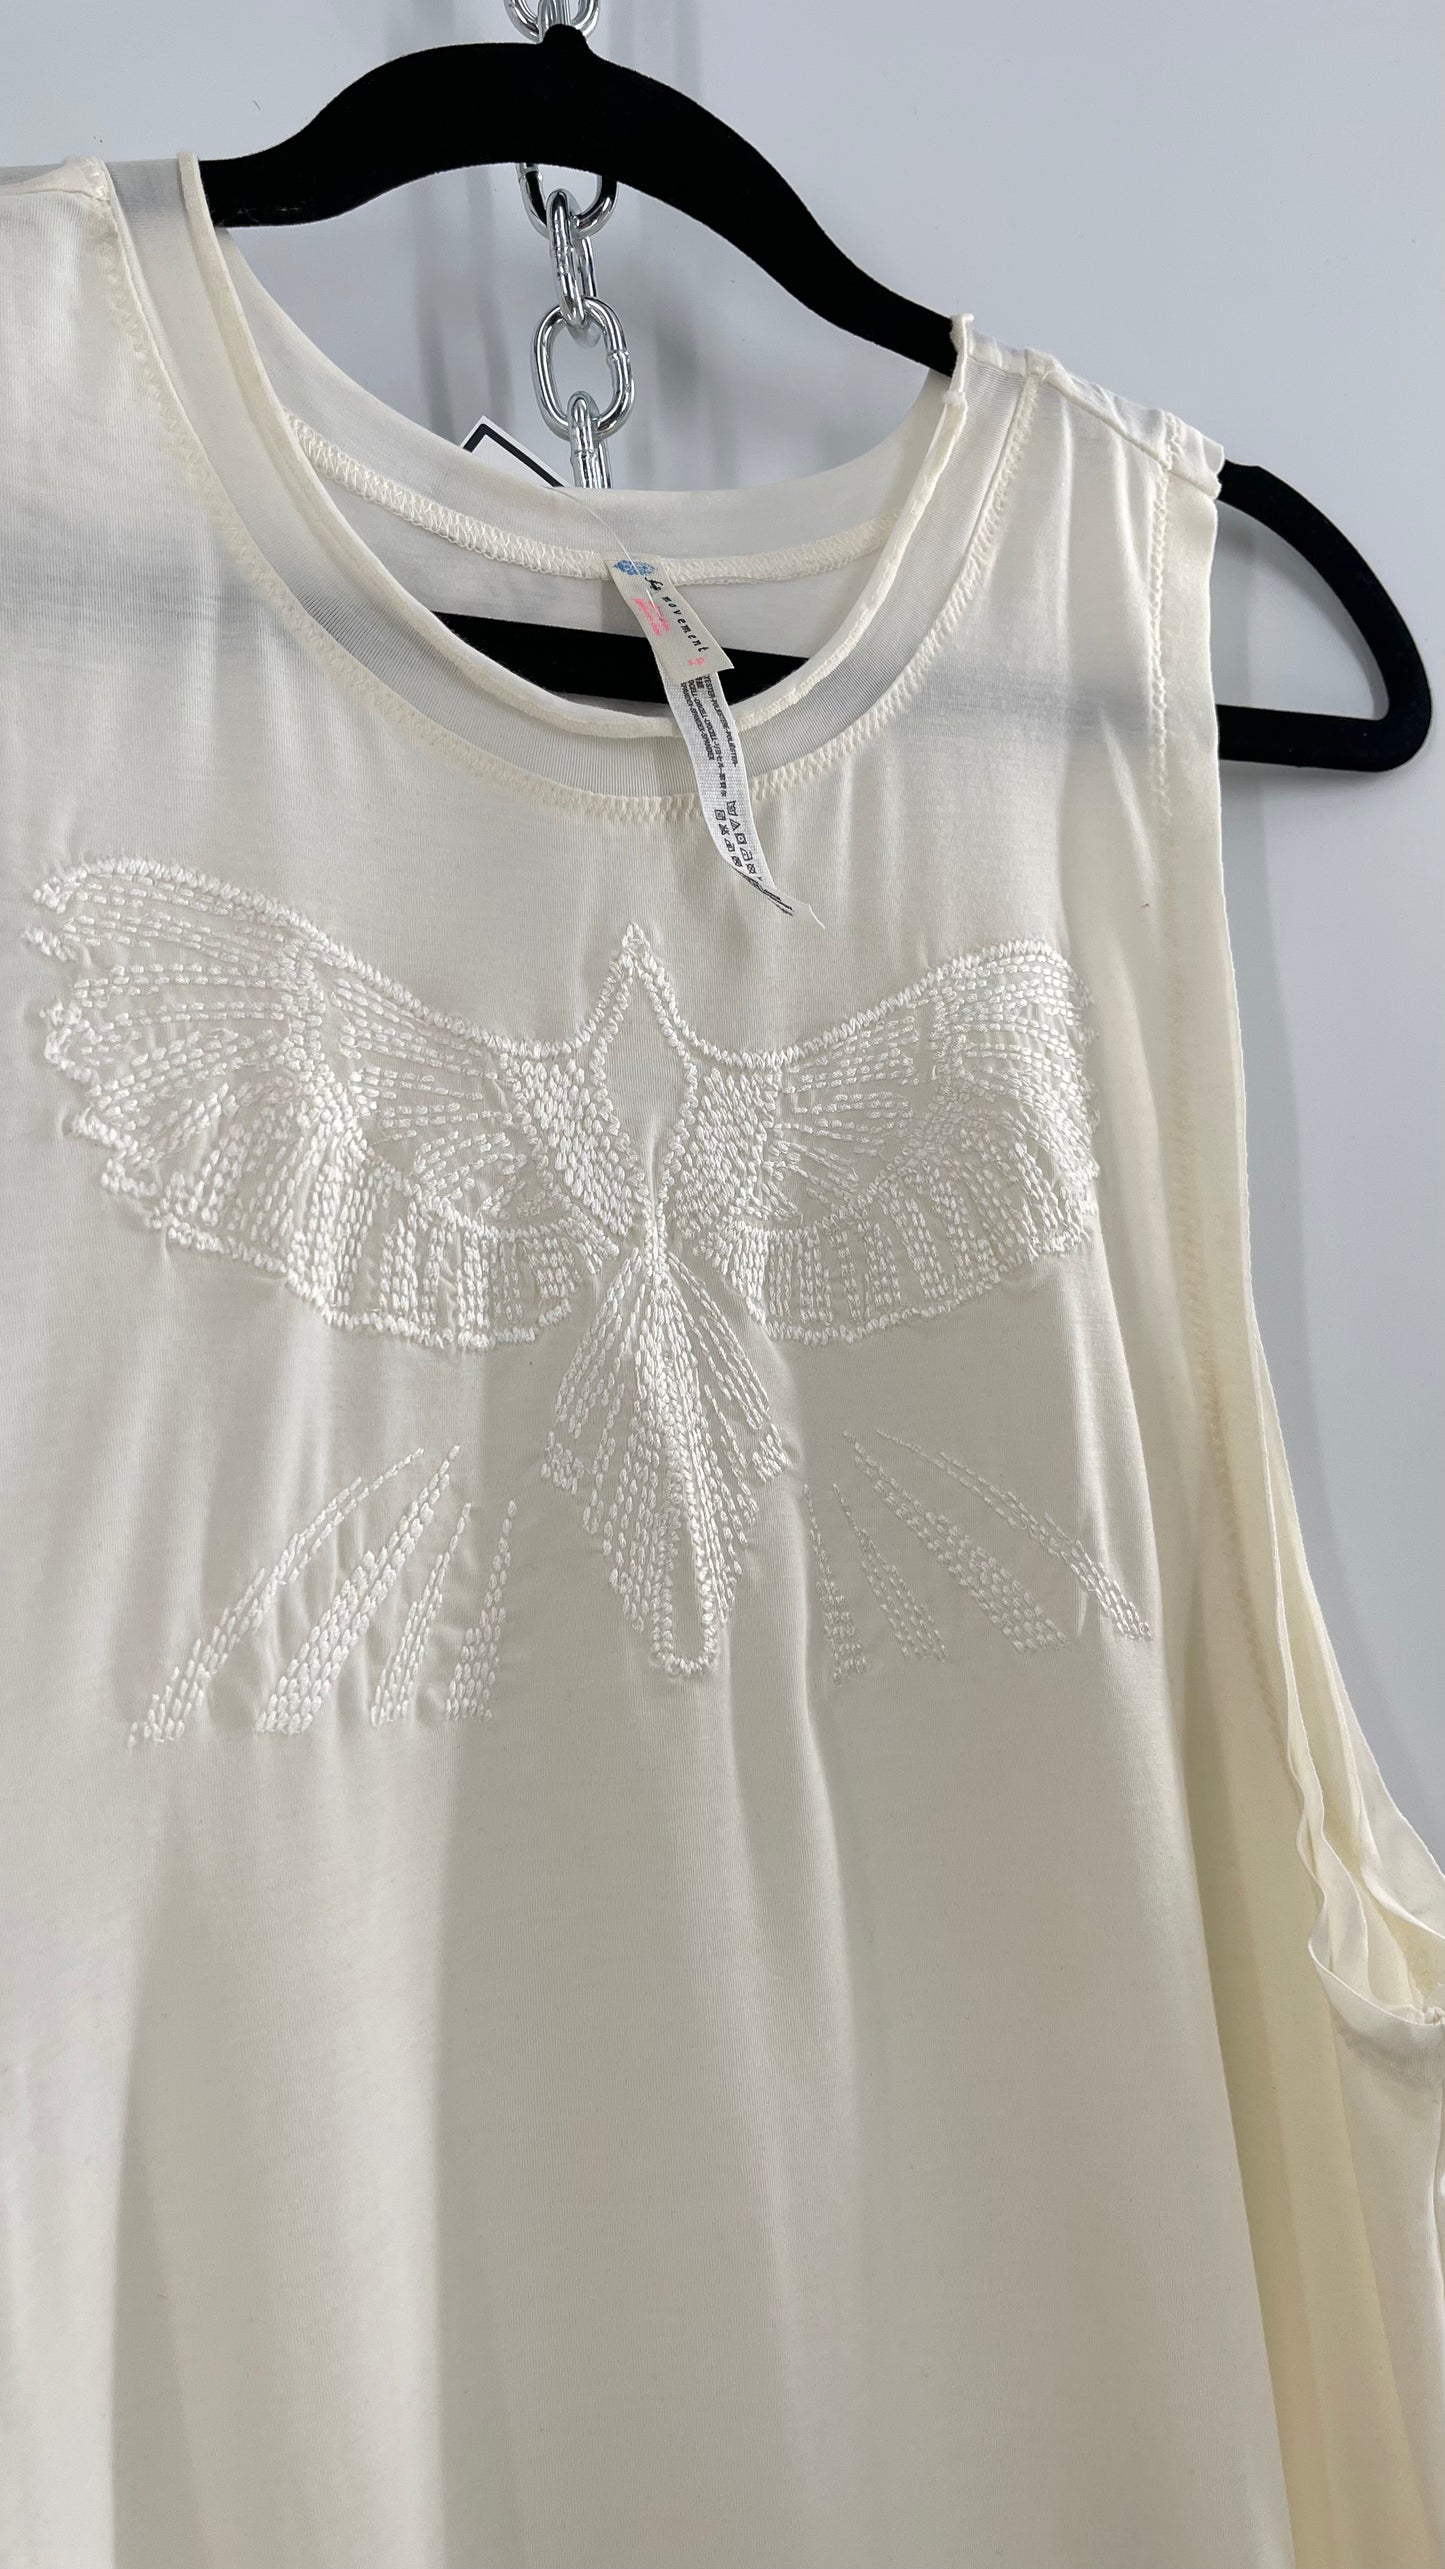 Free People Embroidered Pheonix Tank (Small)